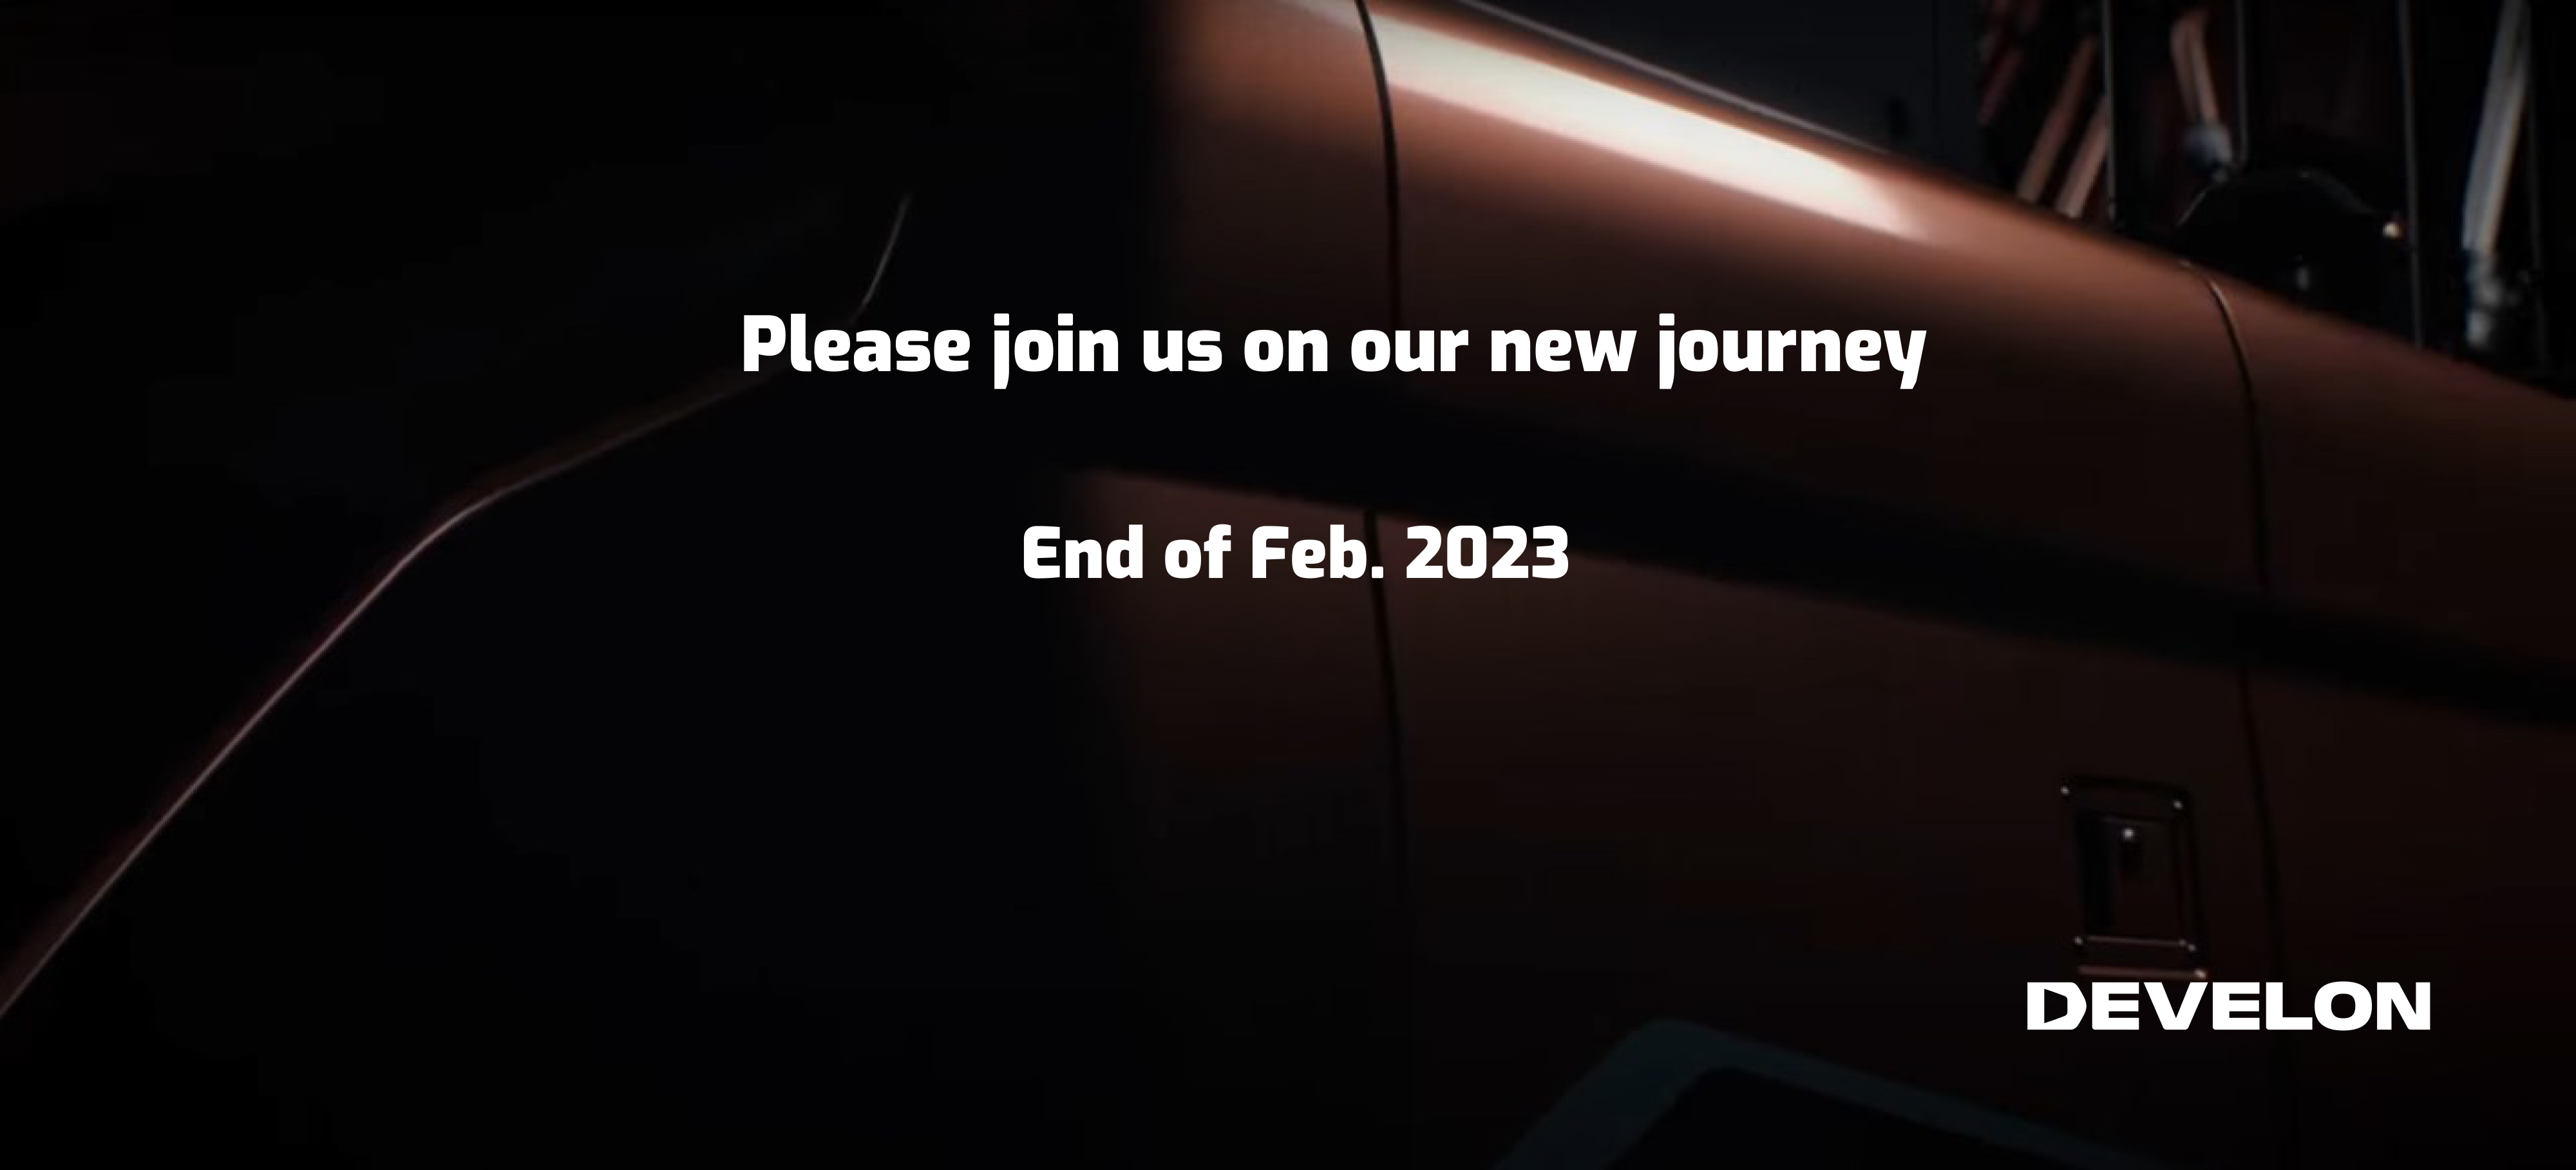 Dramatic extreme-closeup-photo of orange equipment with text that reads: Please join us on our new journey. End of Feb. 2023. DEVELON logo.